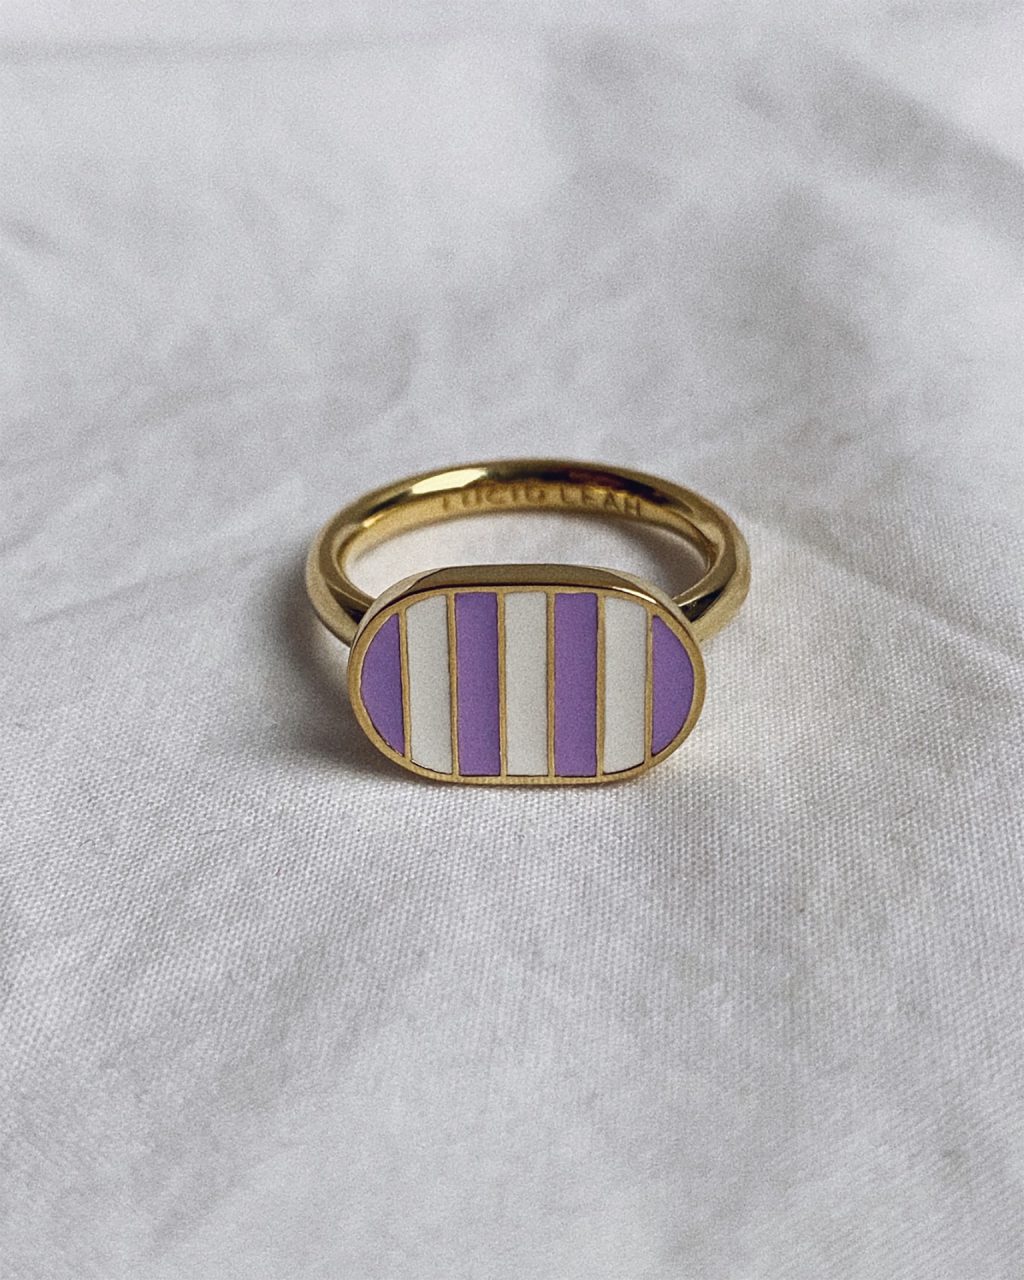 Busy bee ring 18k gold vermeil